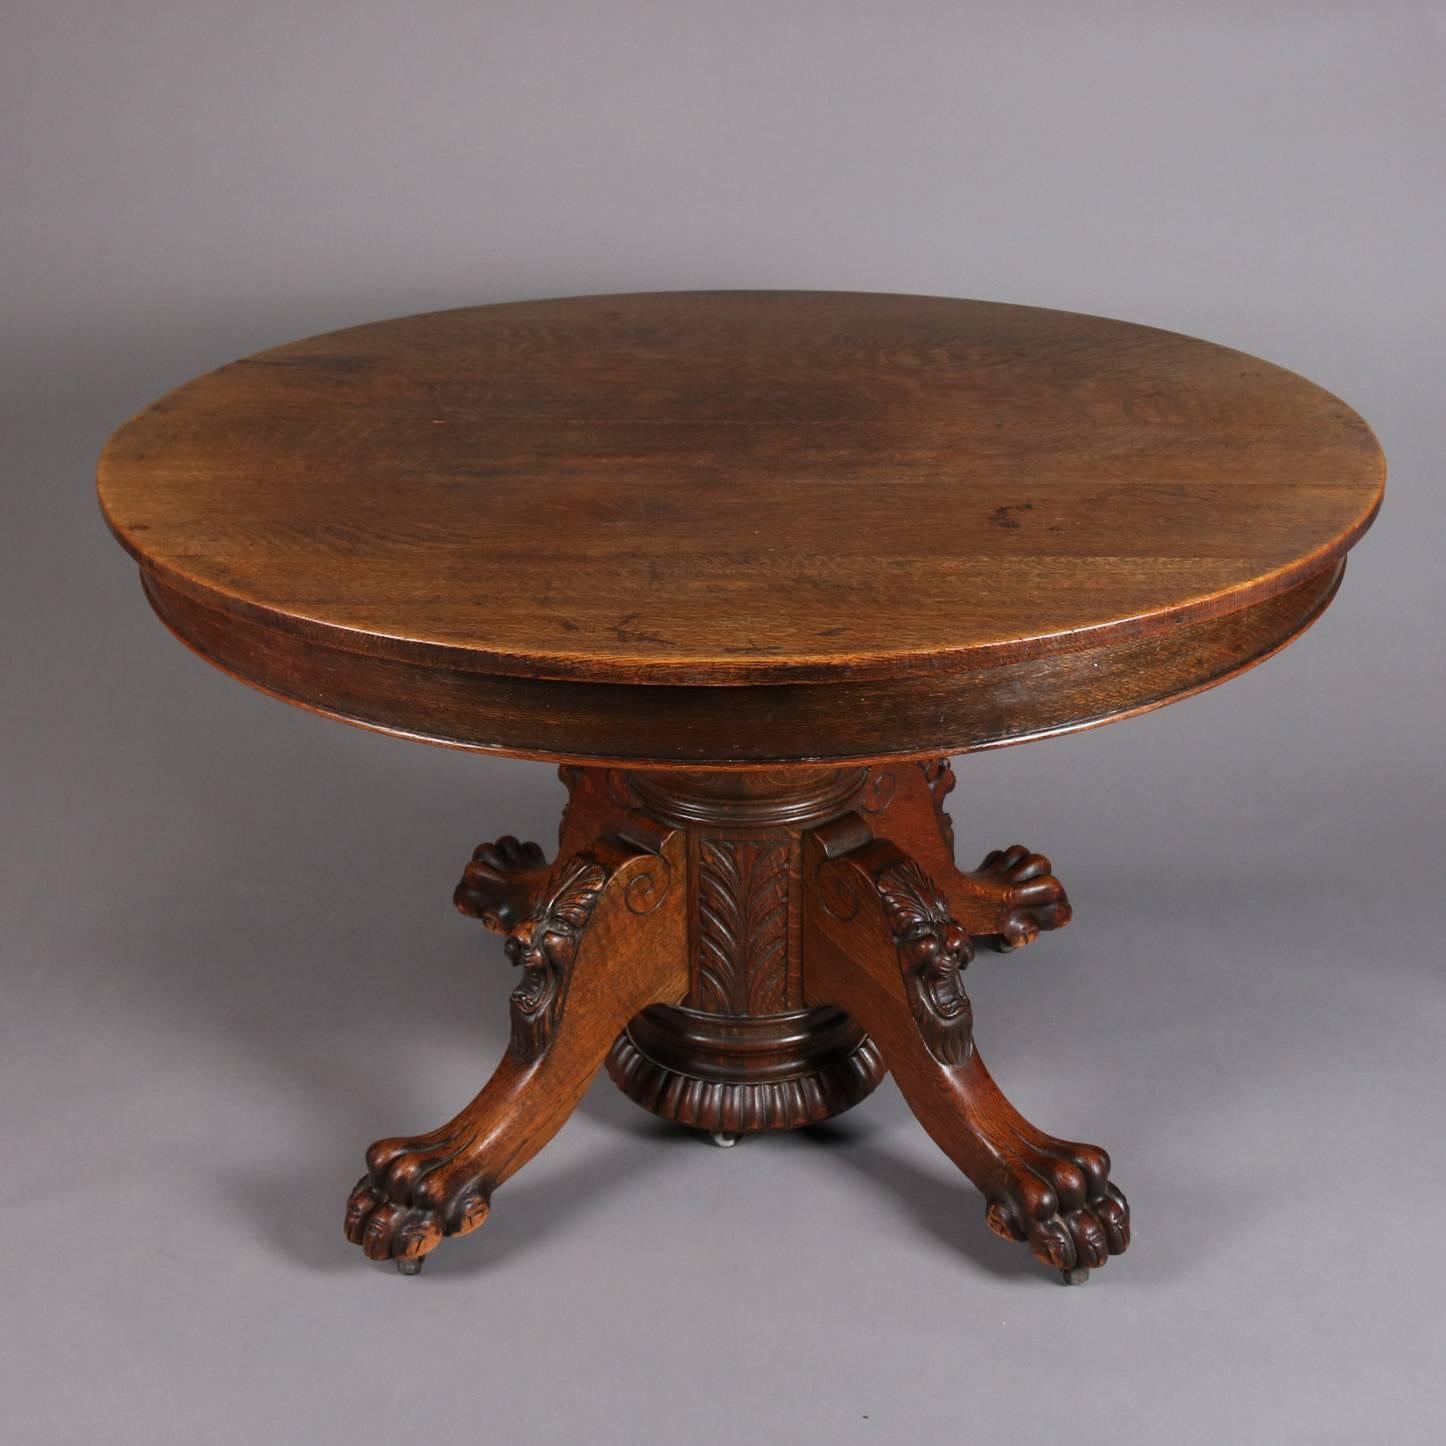 Antique figural dining table features carved lion heads and paw feet, split pedestal base seated on four legs, and 12" three leaves, 19th century

Measures 30", h x 48